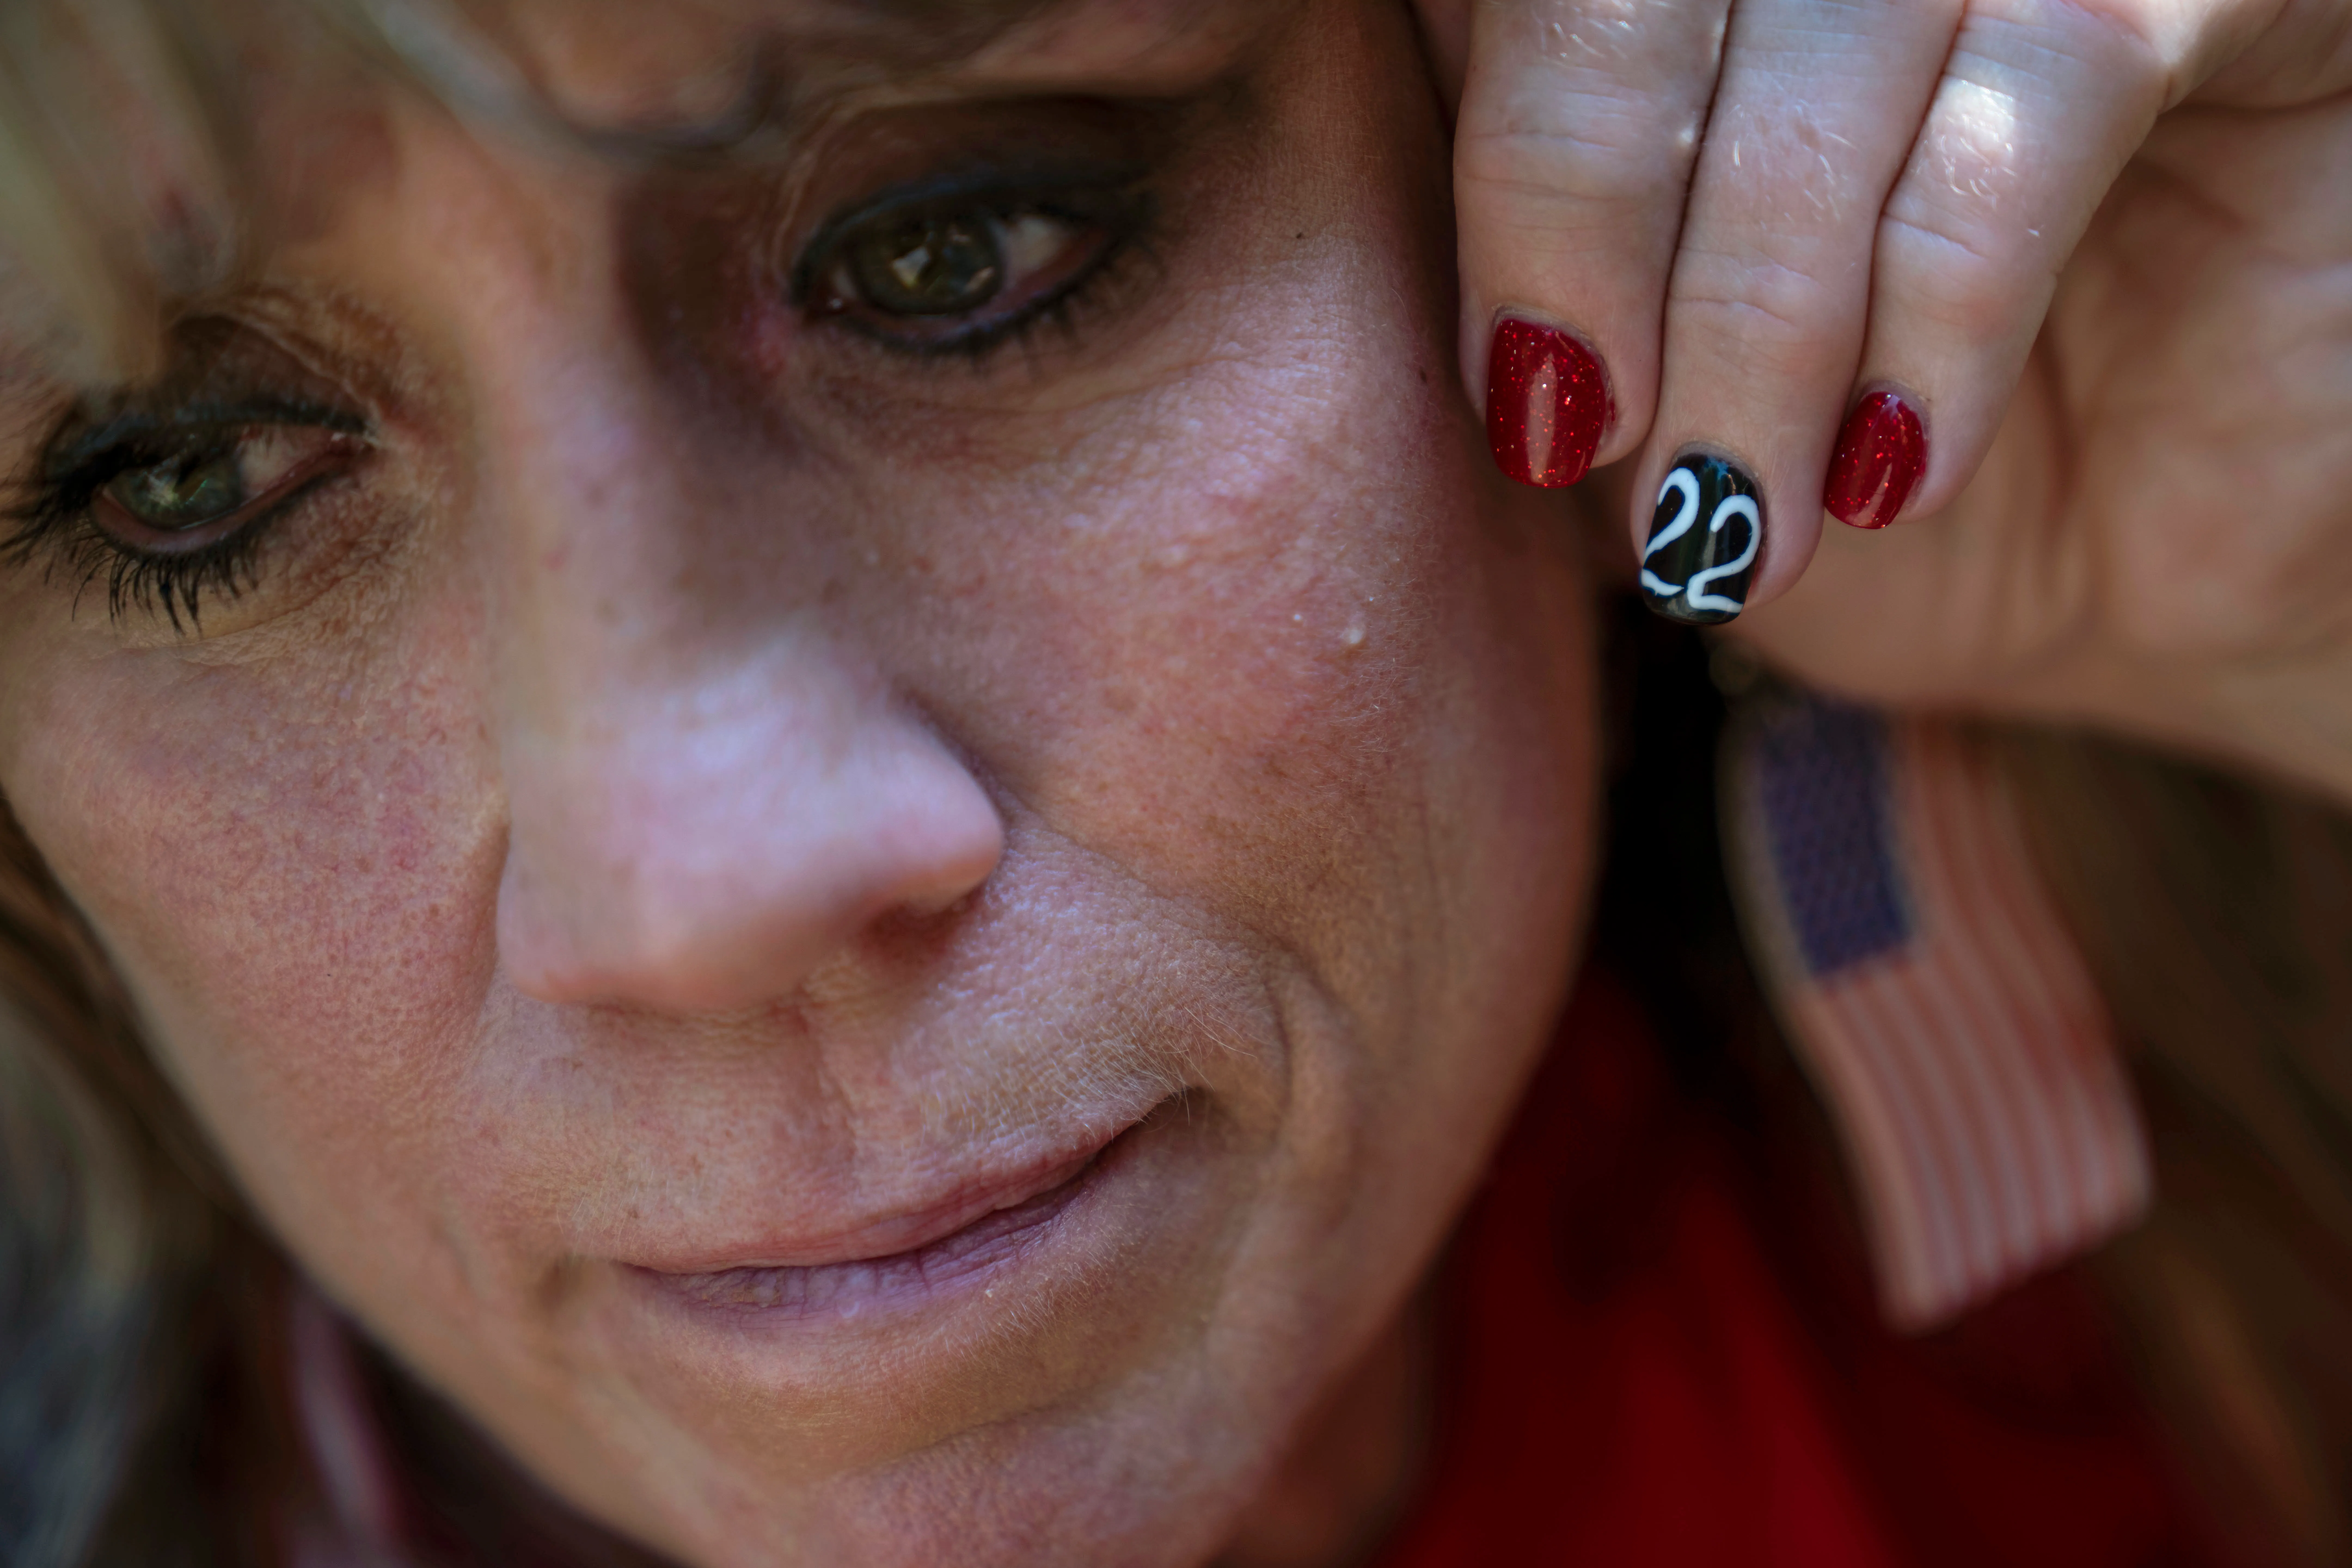 Barbie Rohde headshot with her fingernail decorated with the number 22.